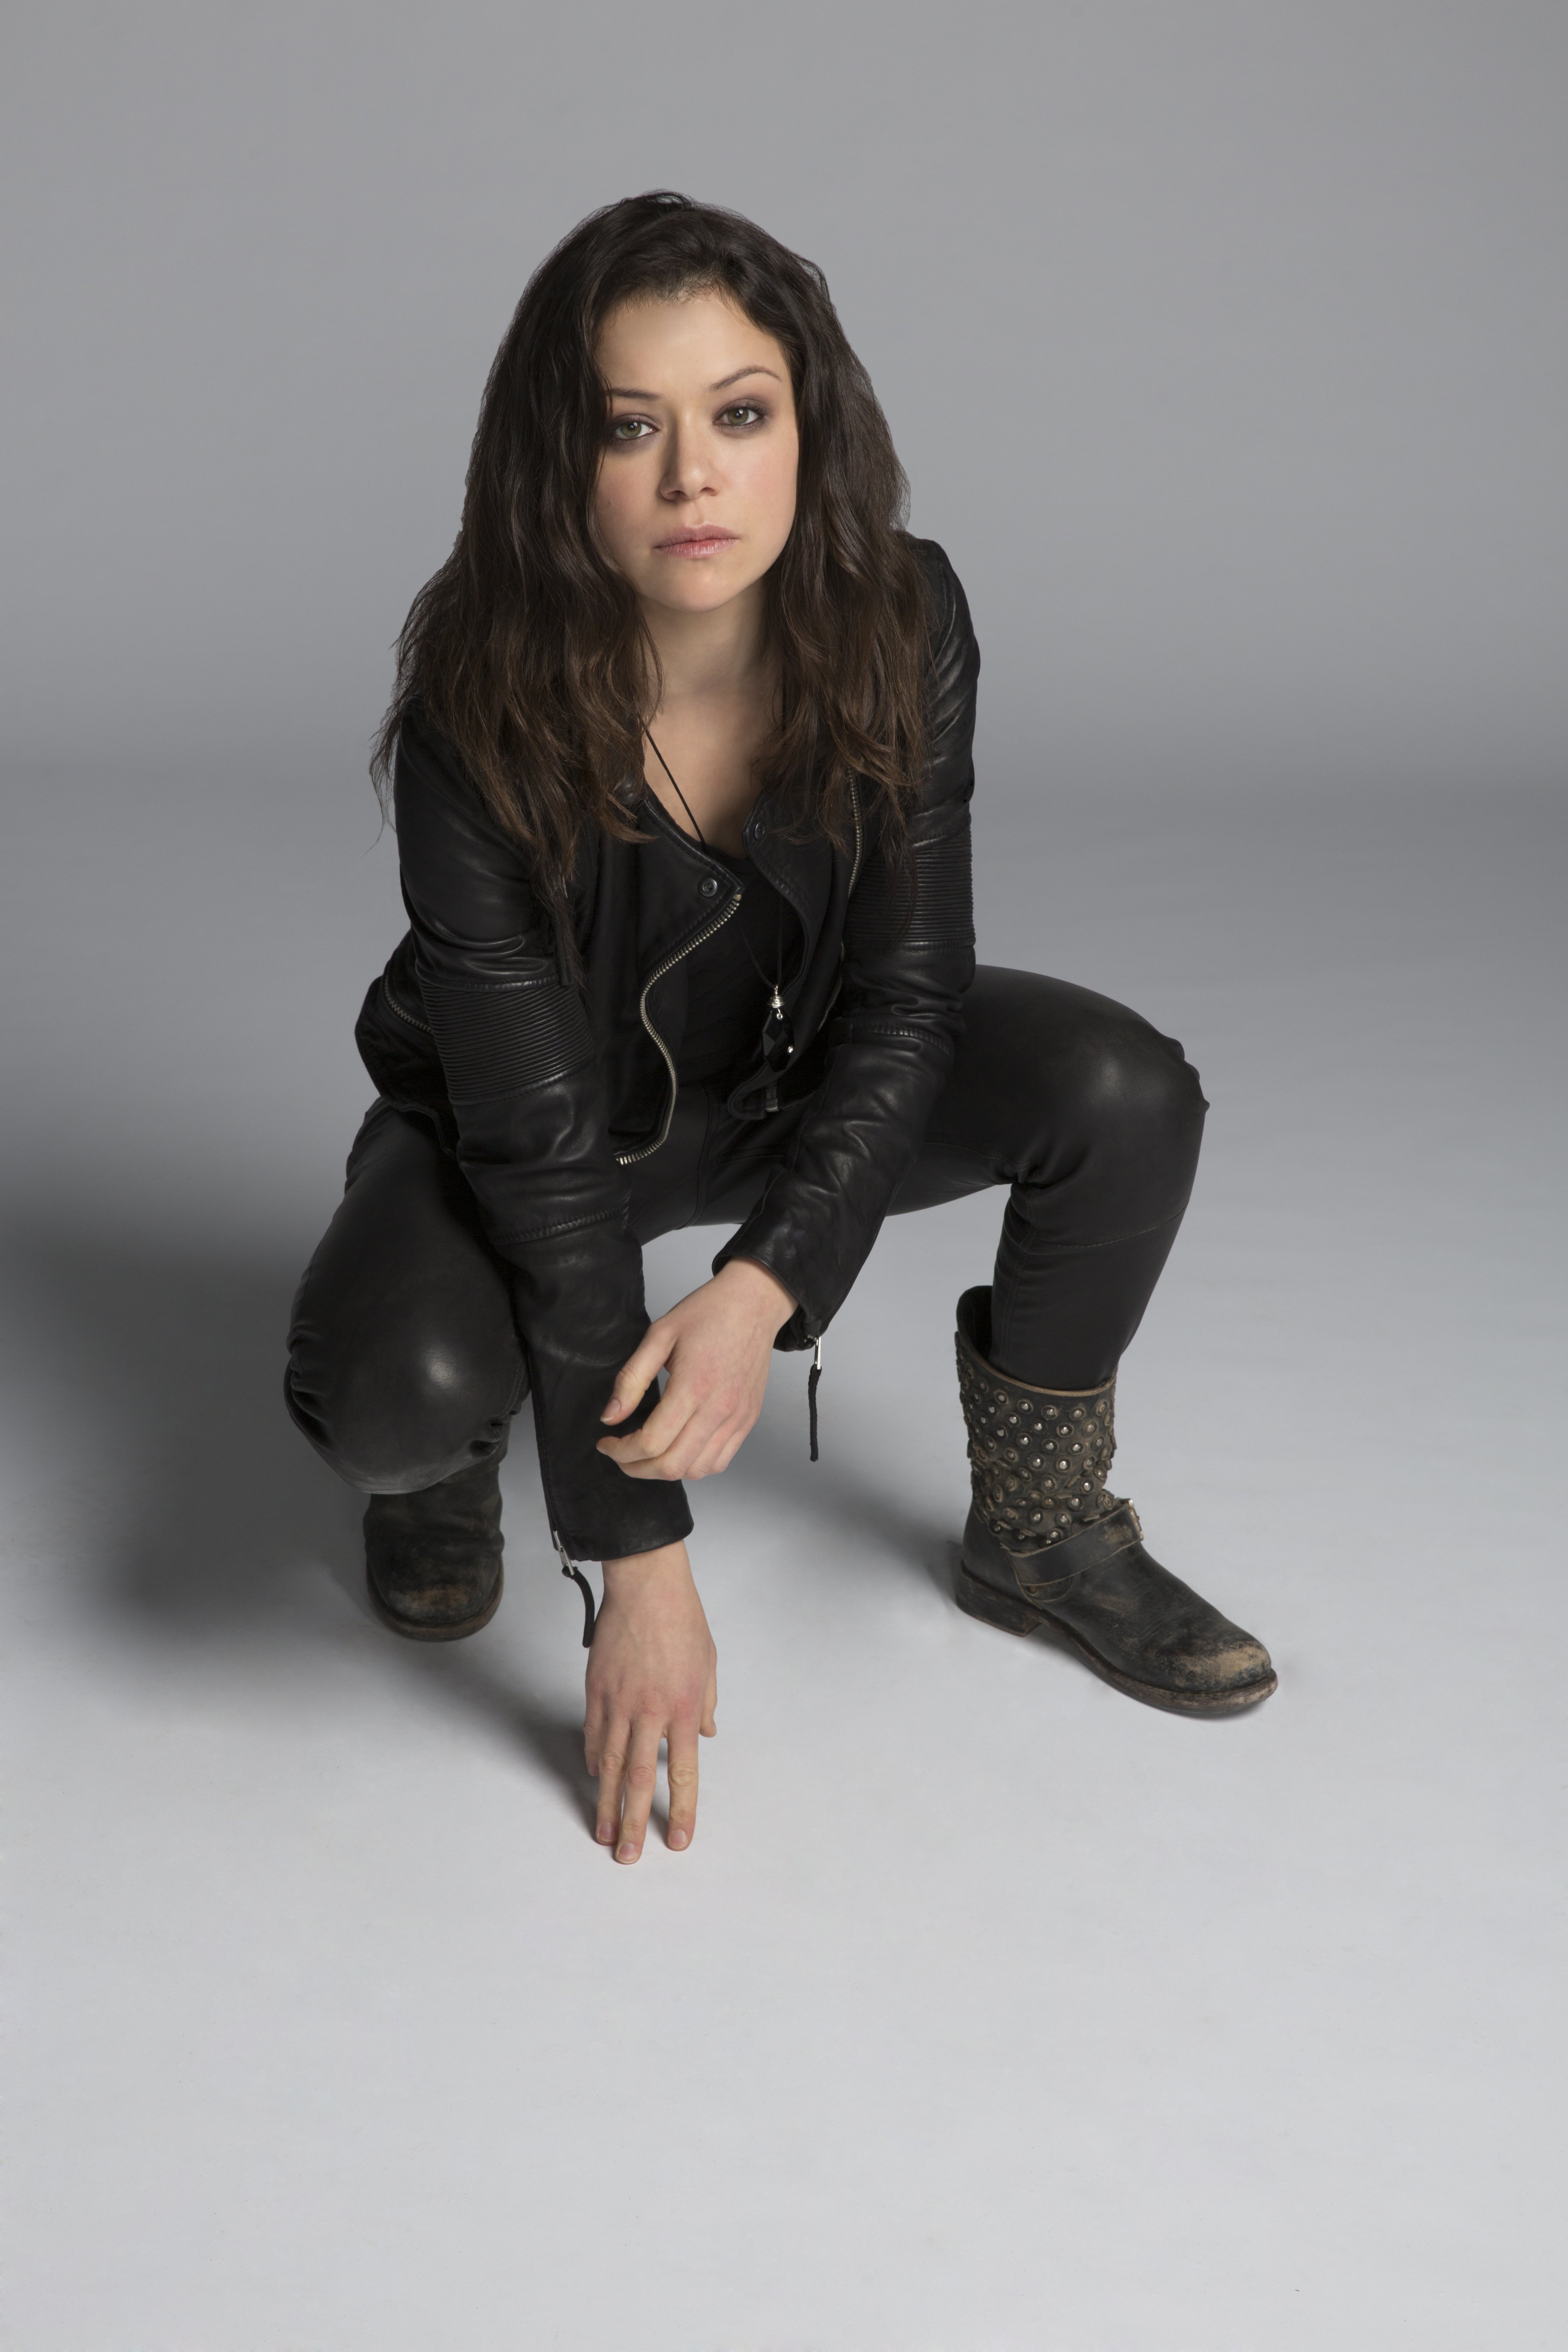 Orphan Black Sarah Manning Season 3 Official Picture